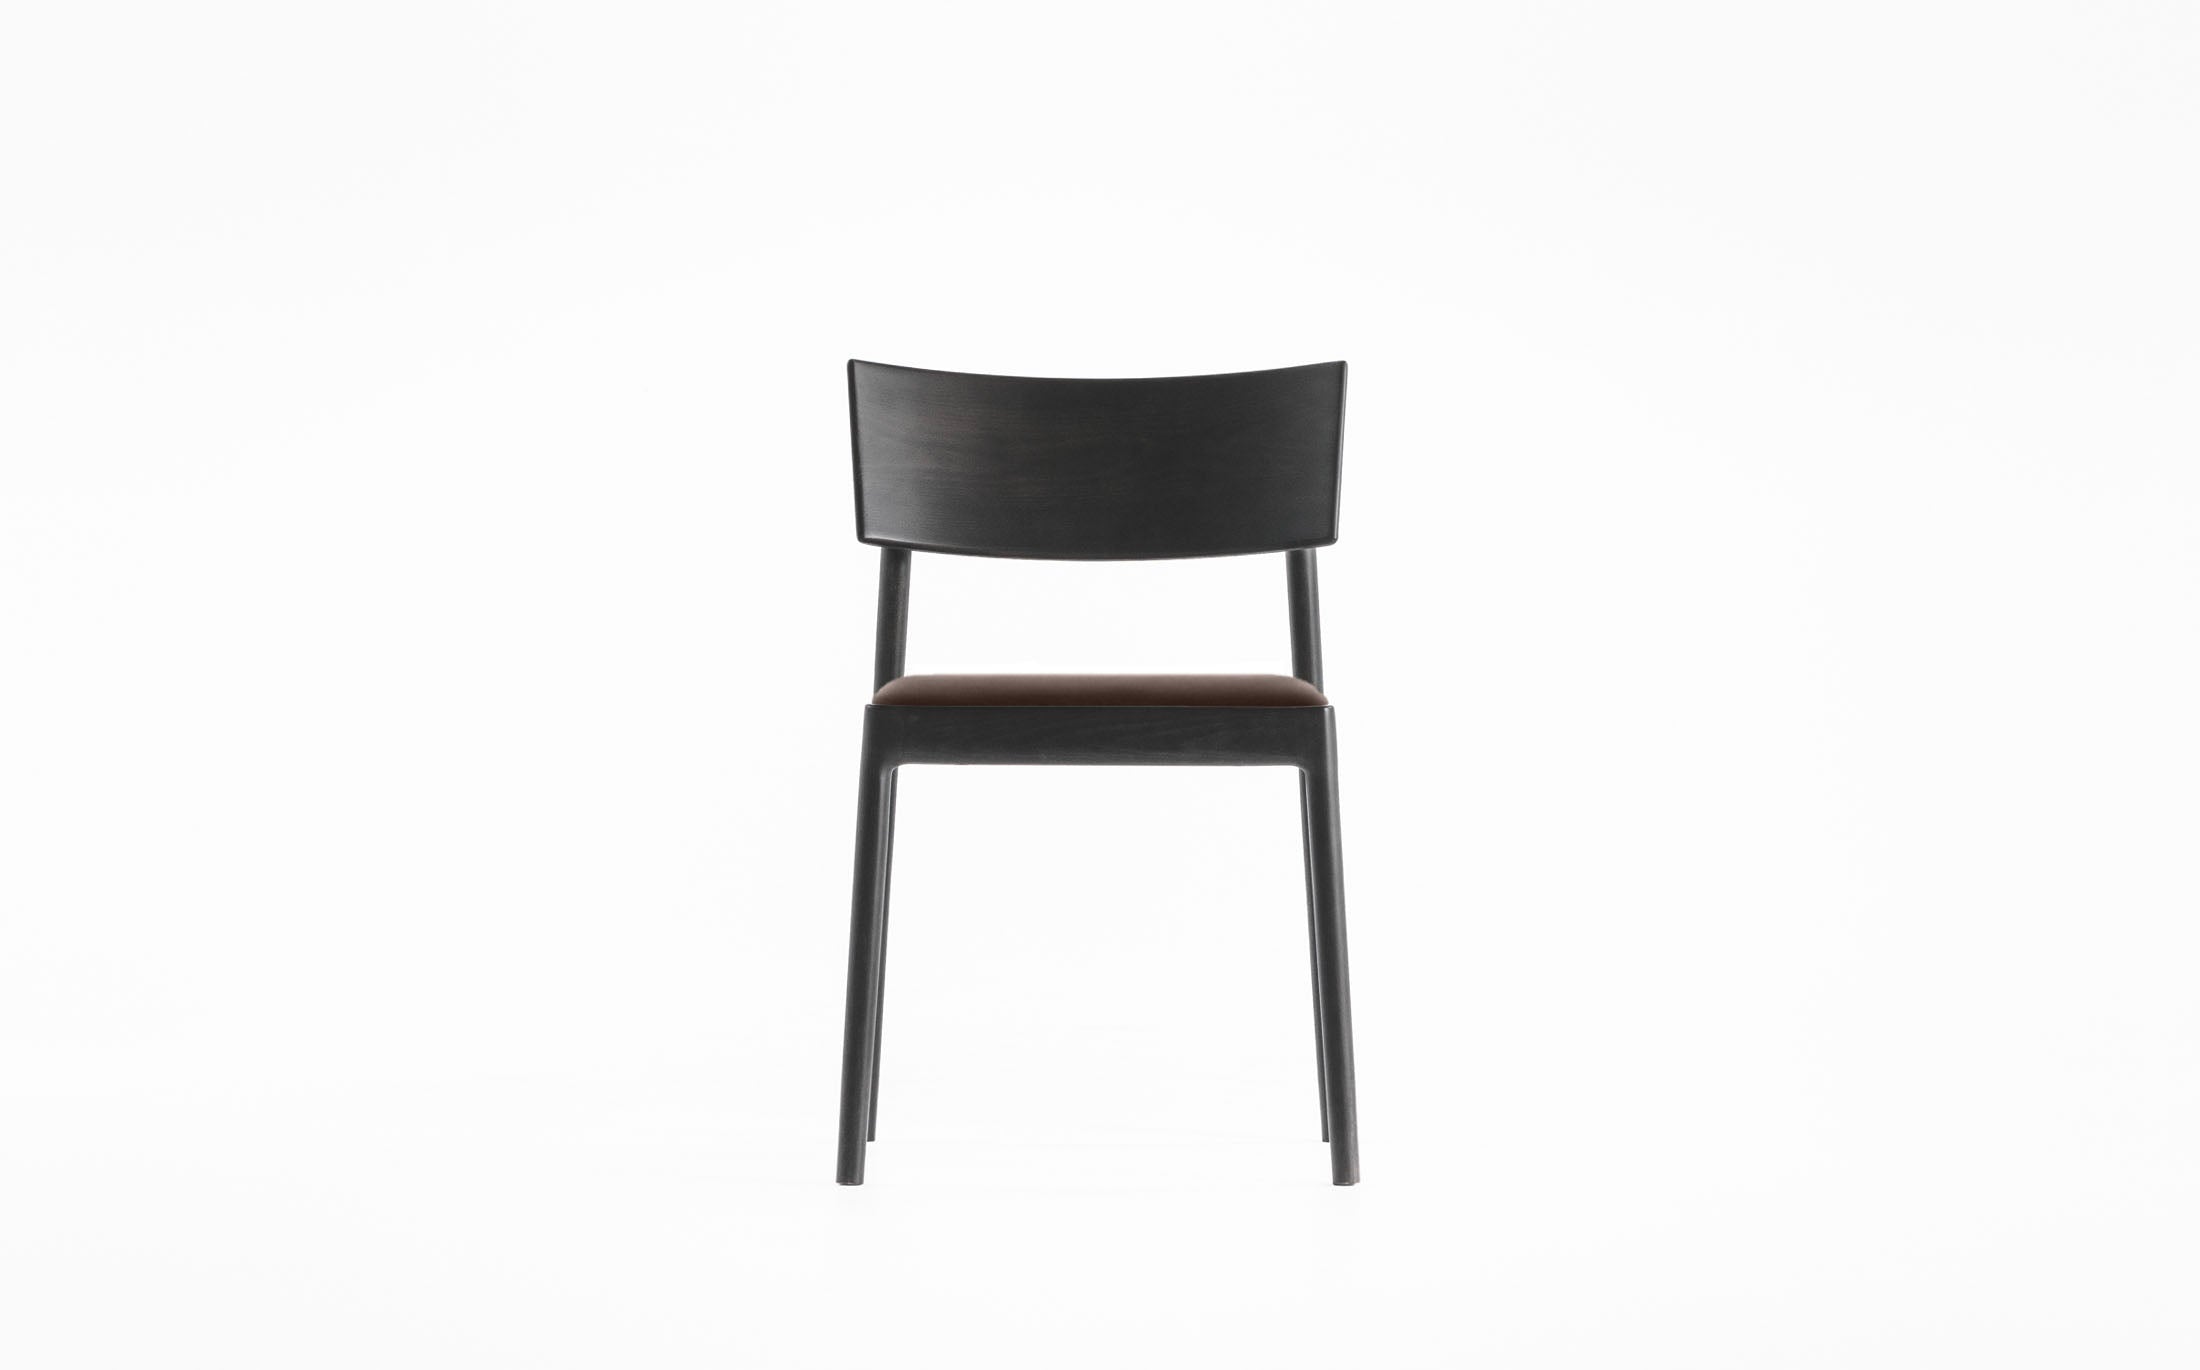 The stacking light chair #Seat materials_smooth leather 40103